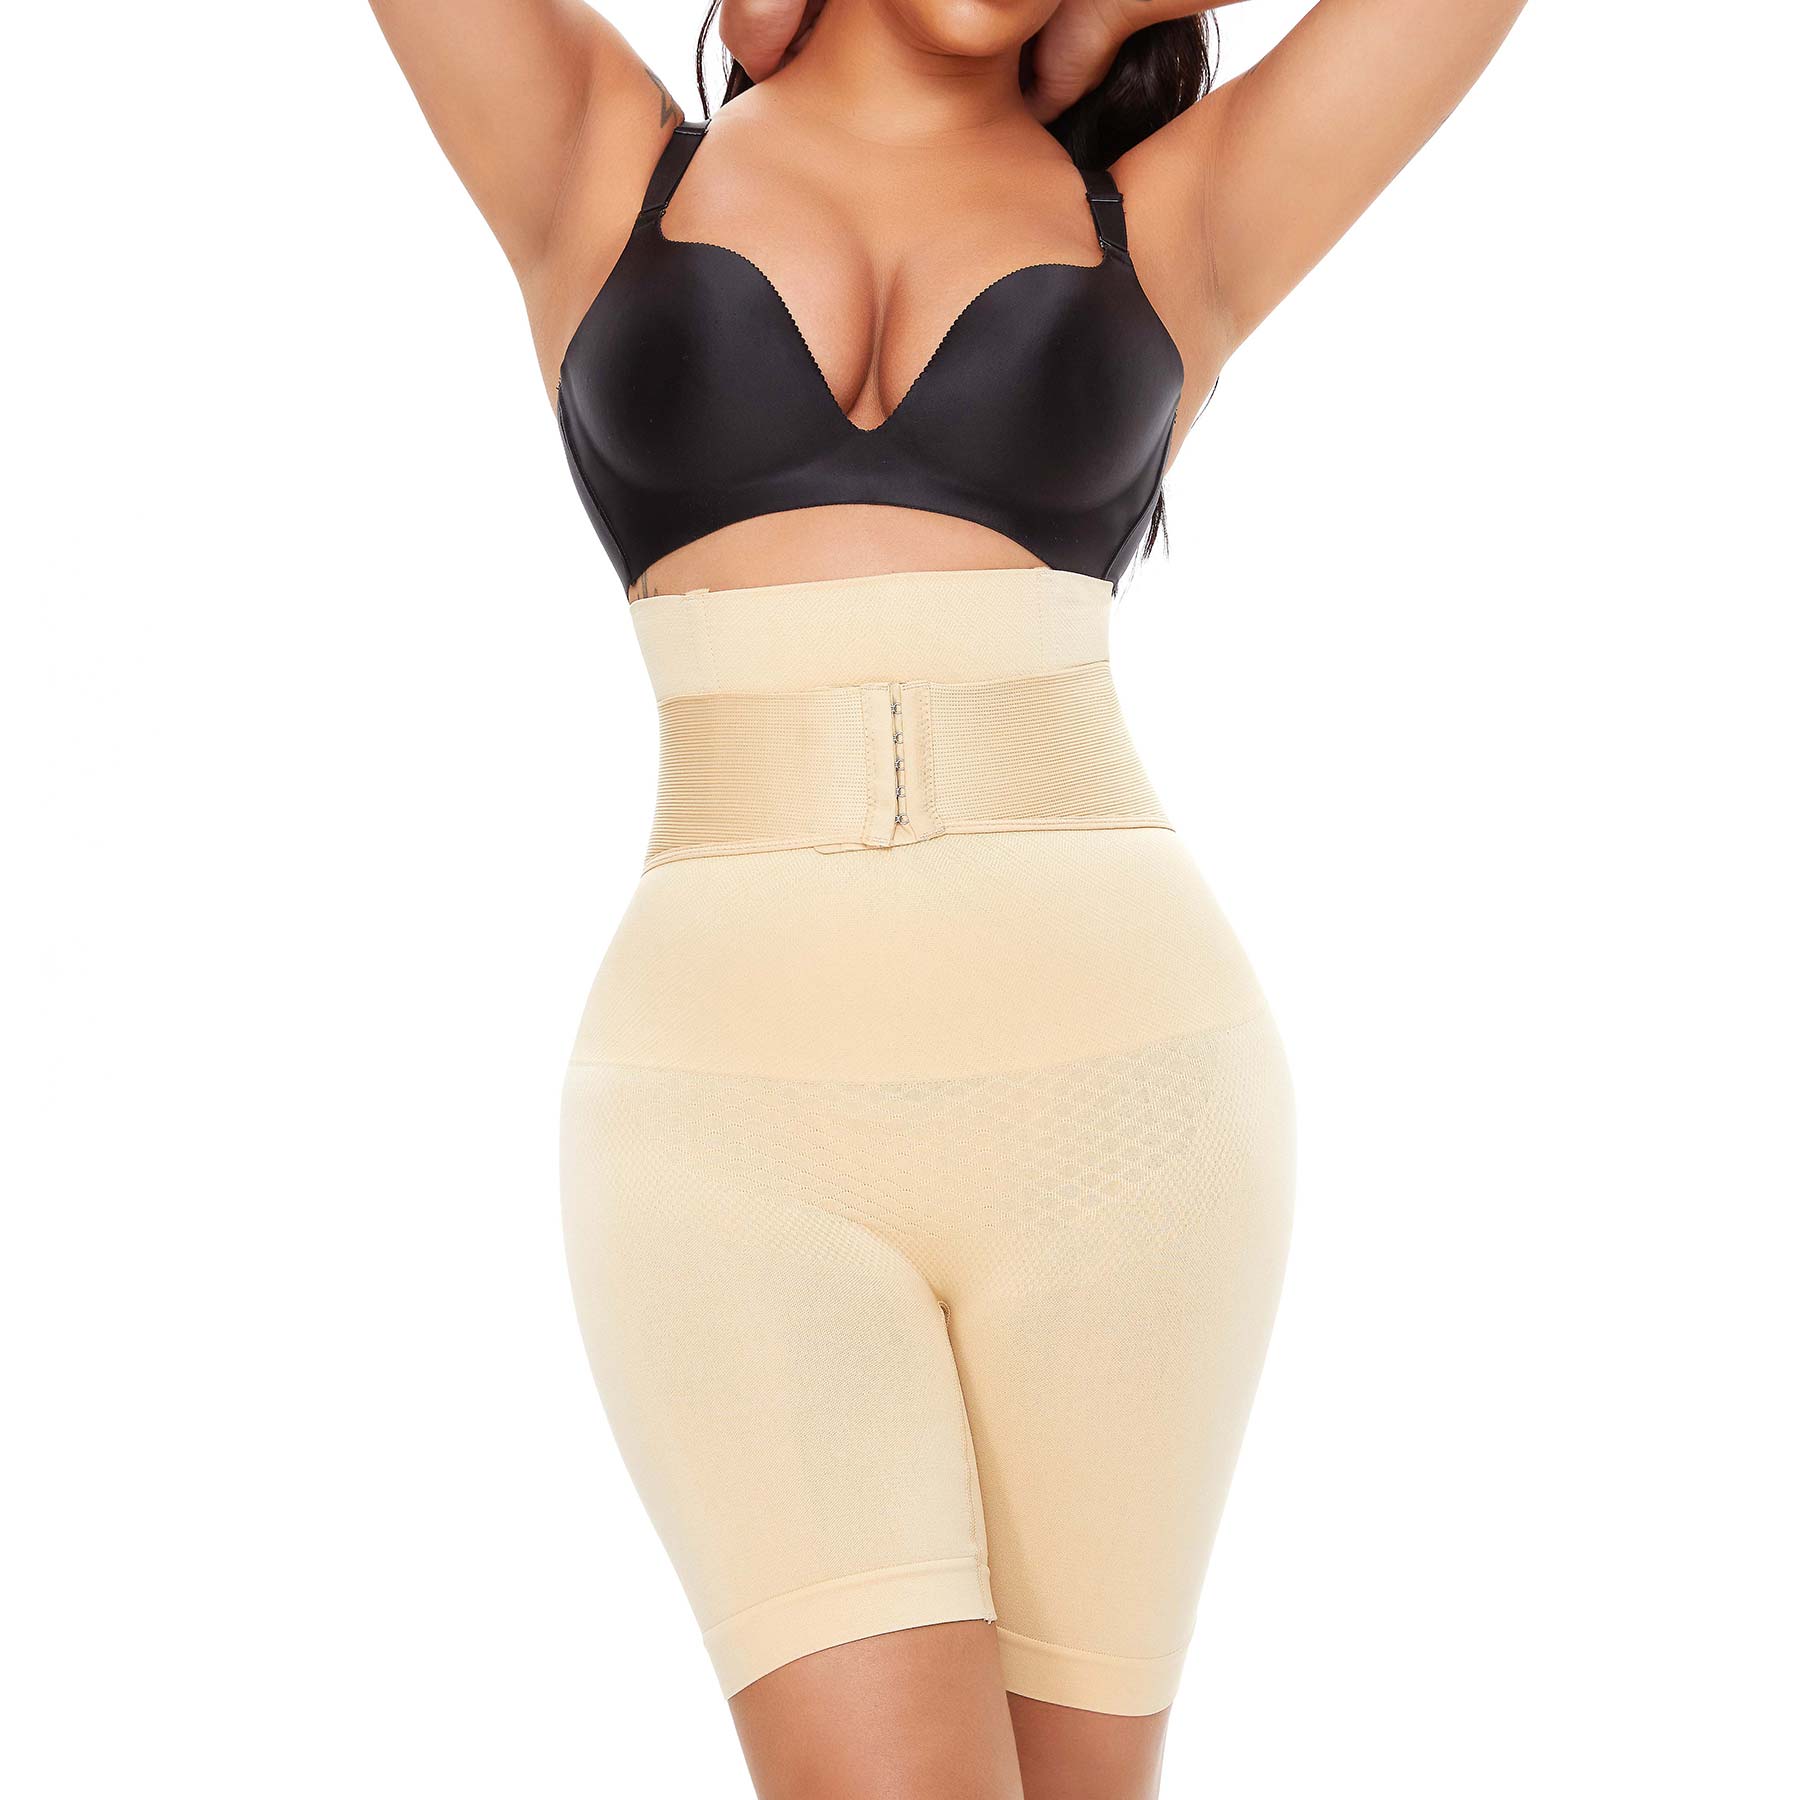 Rotimia Body Fit Breasted Abdominal Pants